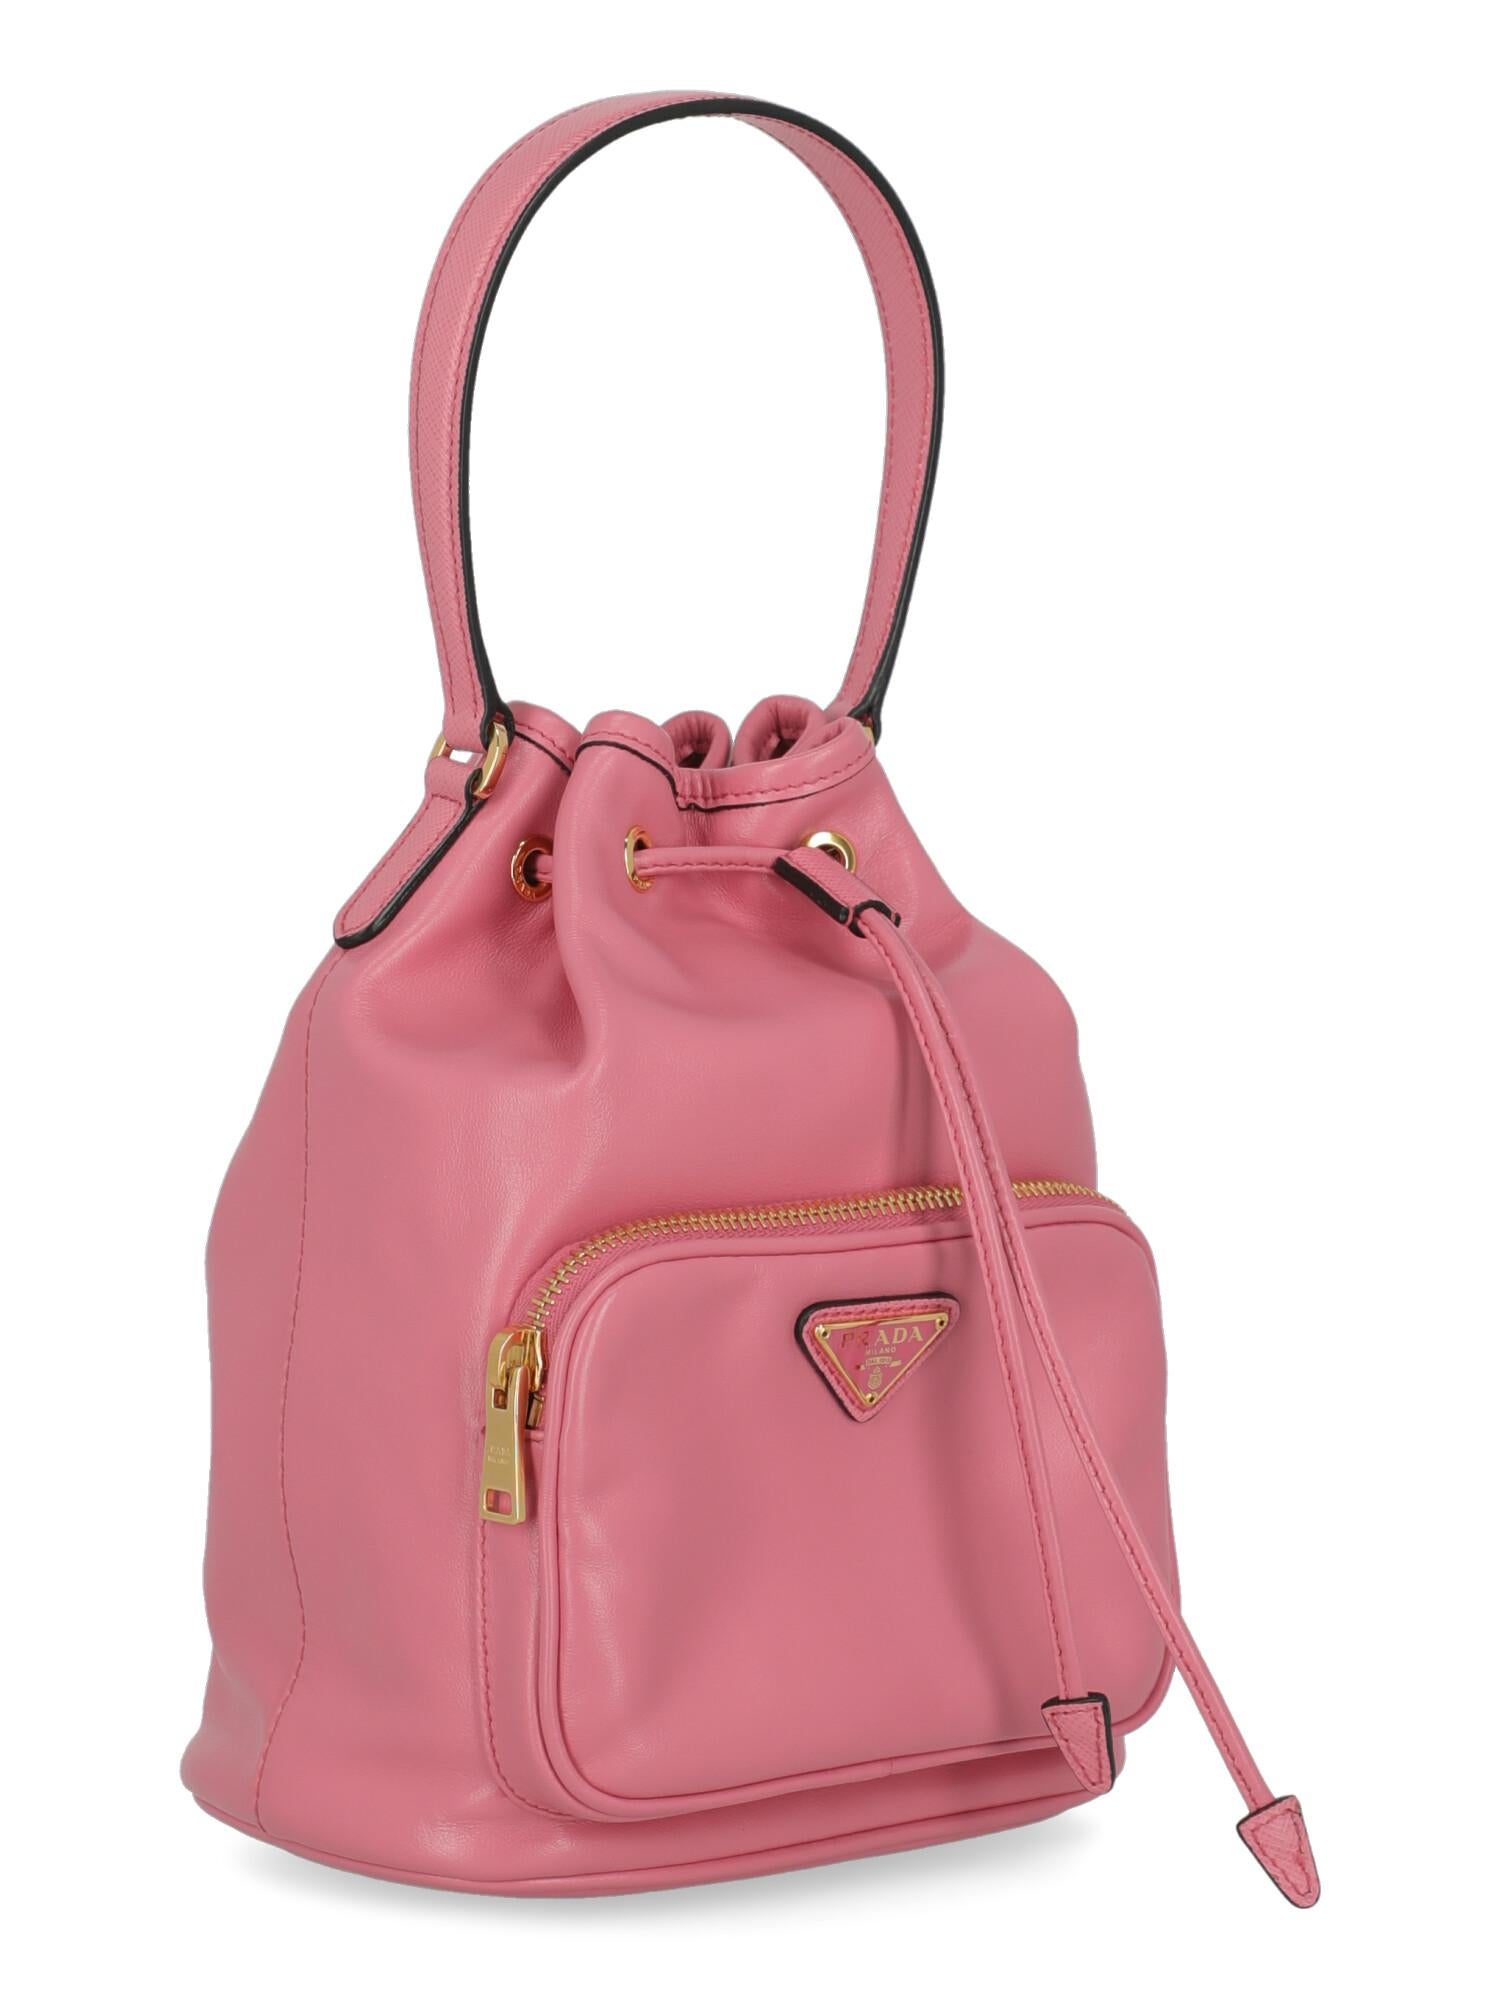 Prada Women  Handbags Pink Leather In Excellent Condition For Sale In Milan, IT